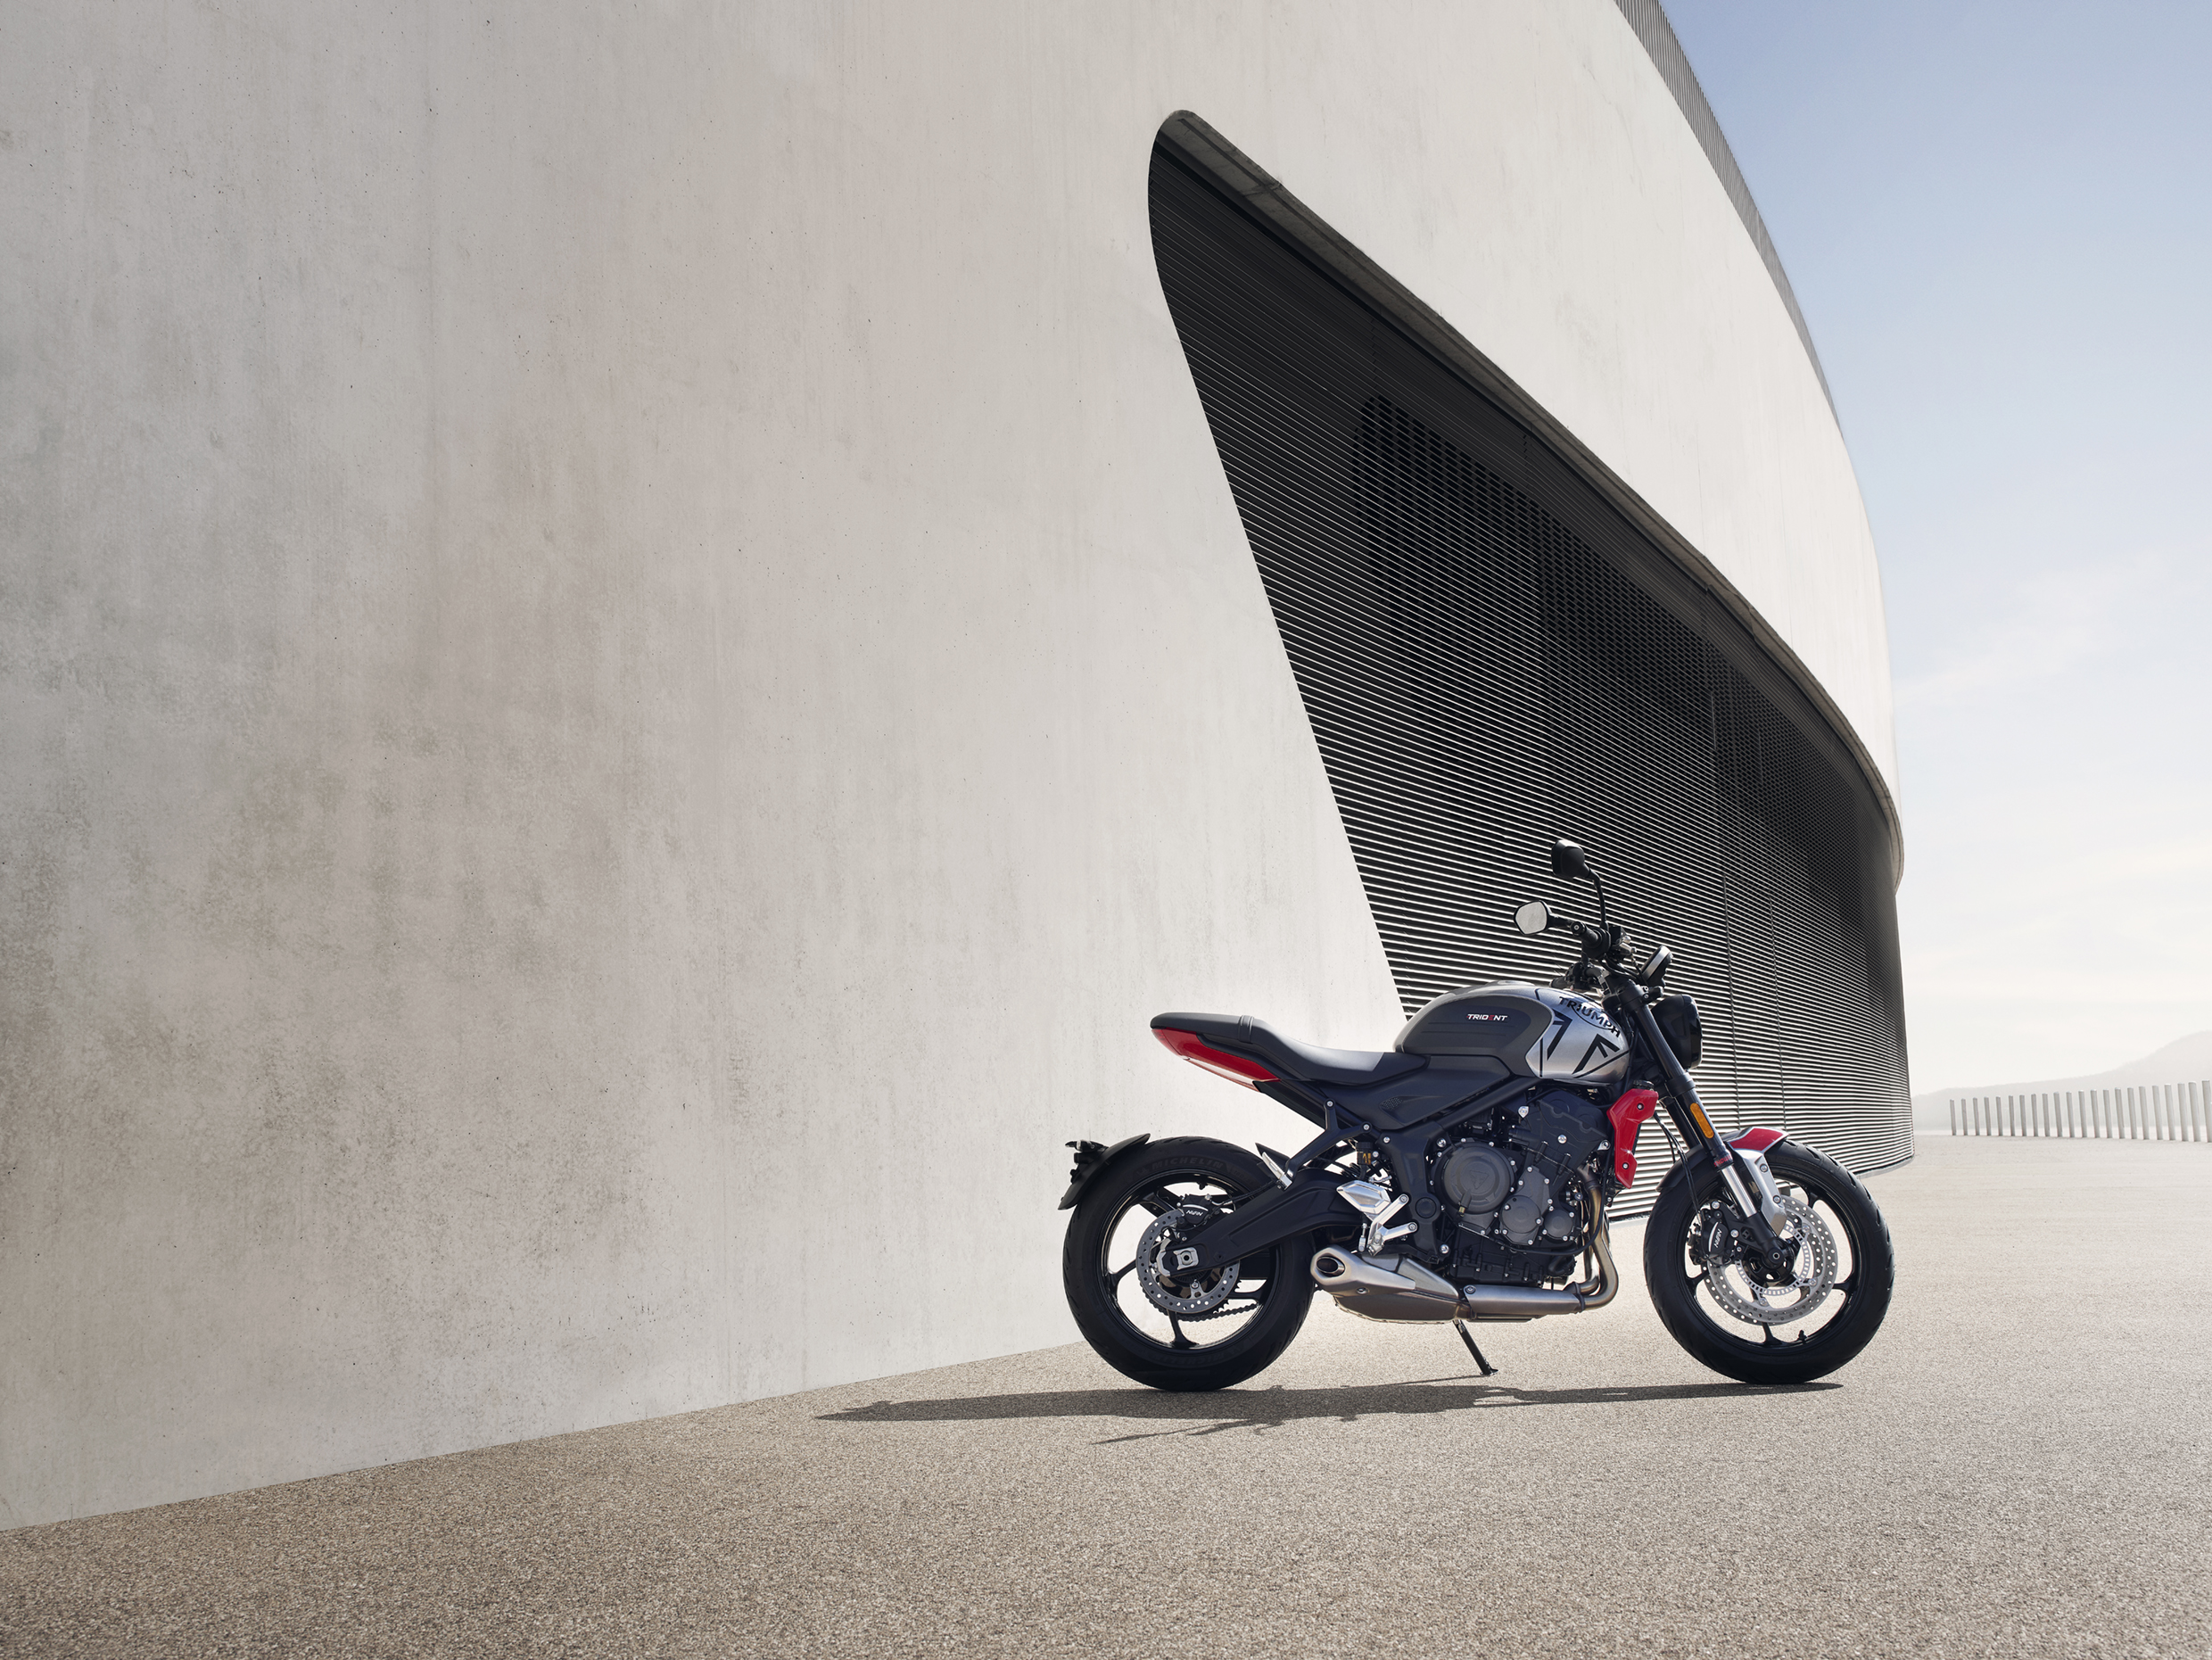 Static image of the 2022 Triumph Trident 660 against a large wall